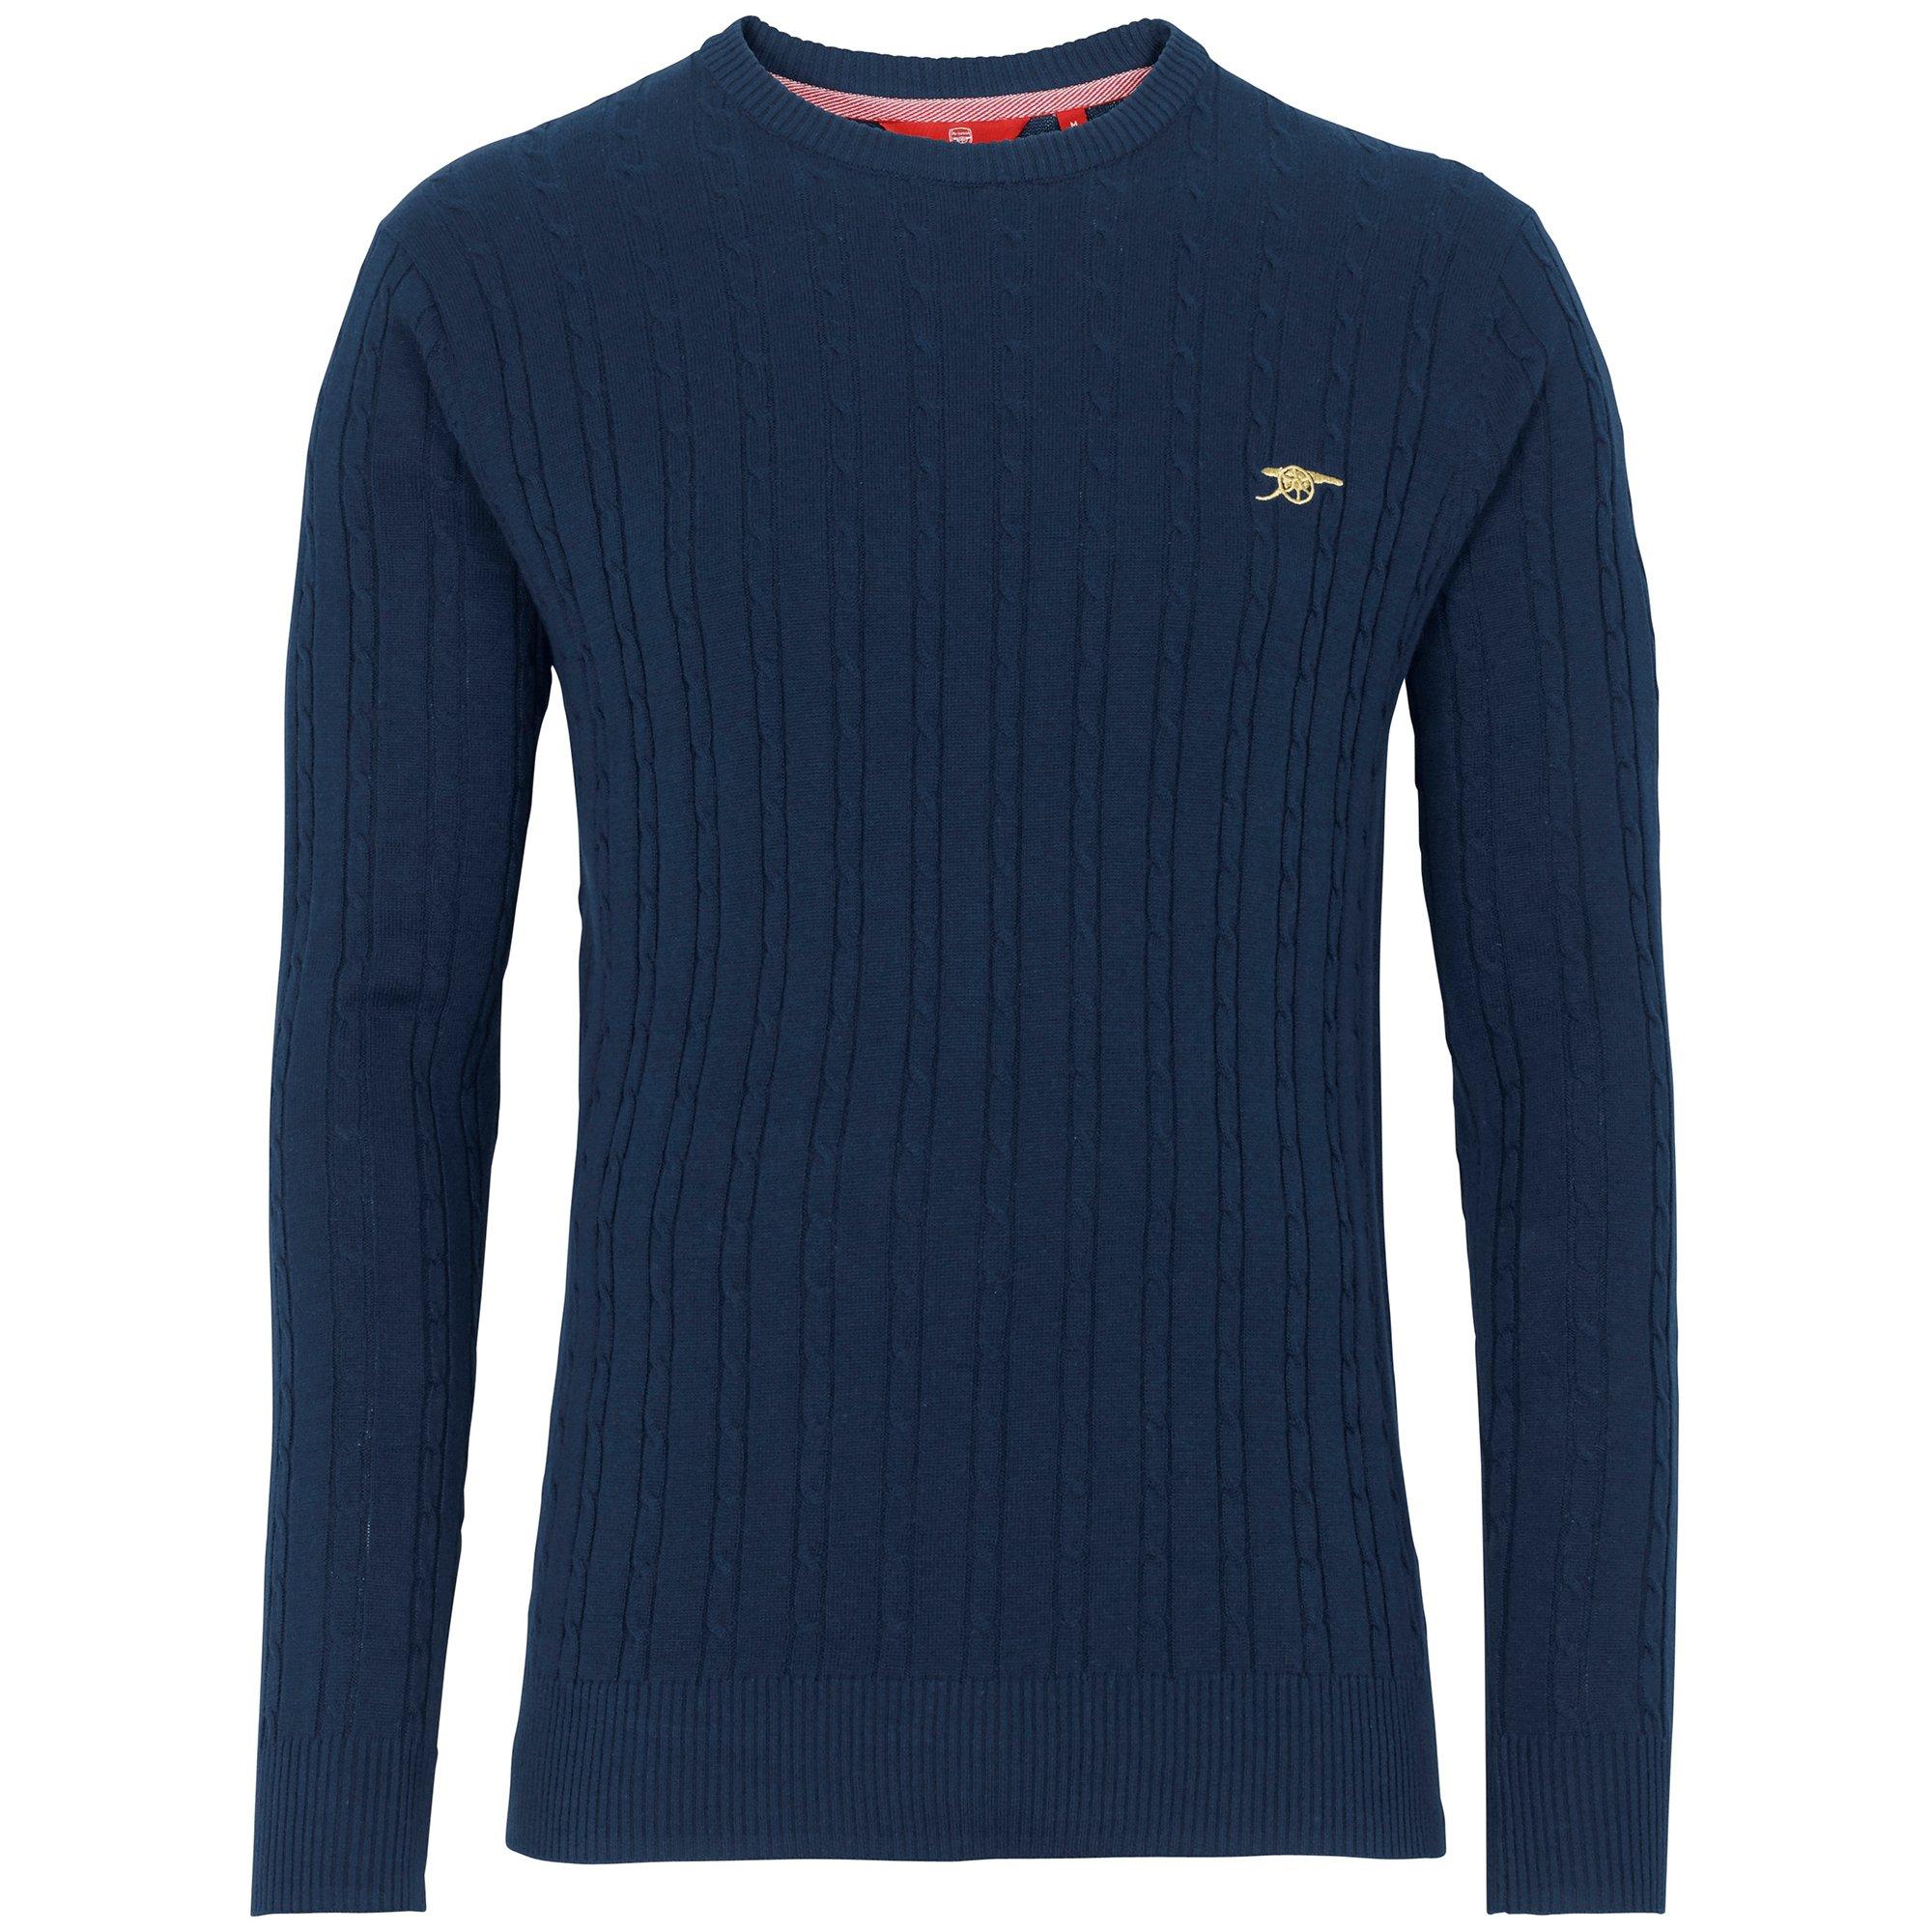 Arsenal Since 1886 Cable Knit Jumper | Official Arsenal Online Store